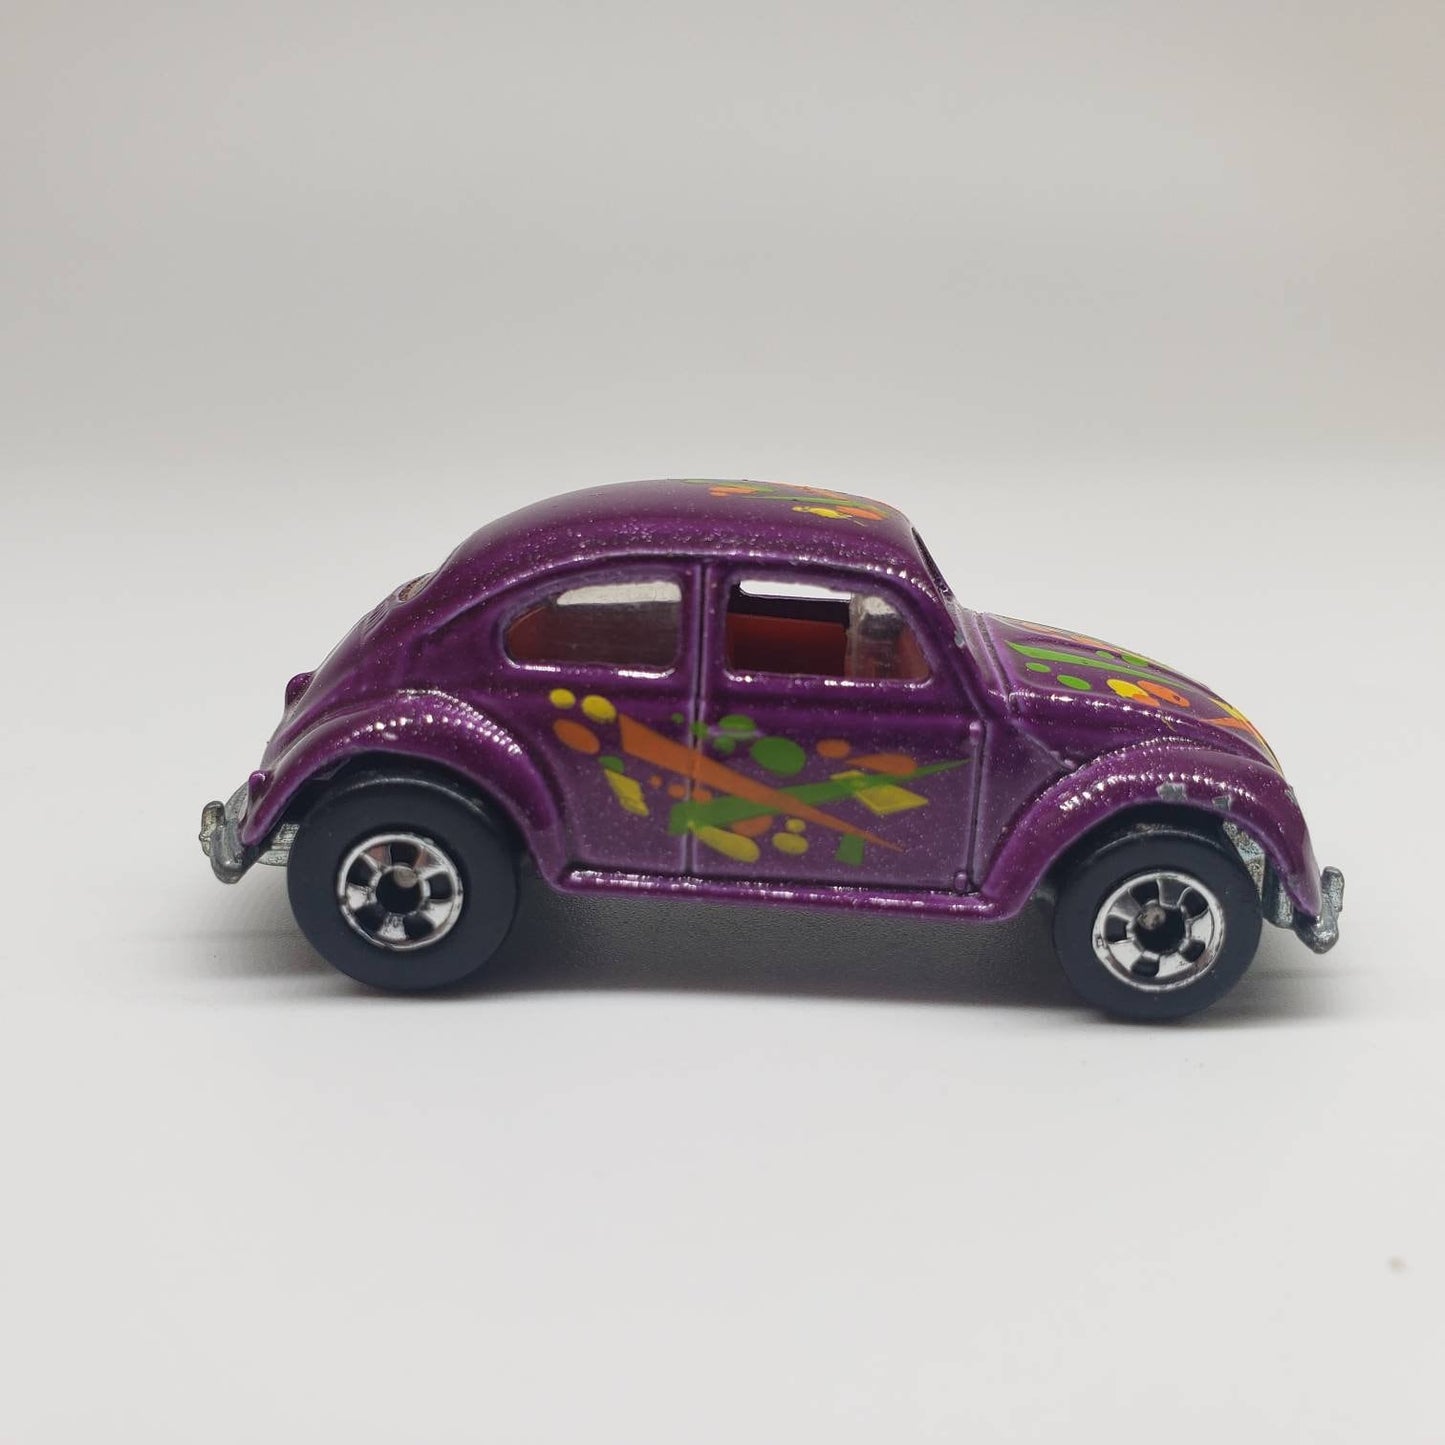 Hot Wheels VW Bug Purple Mainline Volkswagen Beetle Collectible Miniature Scale Model Toy Car Perfect Birthday Gift